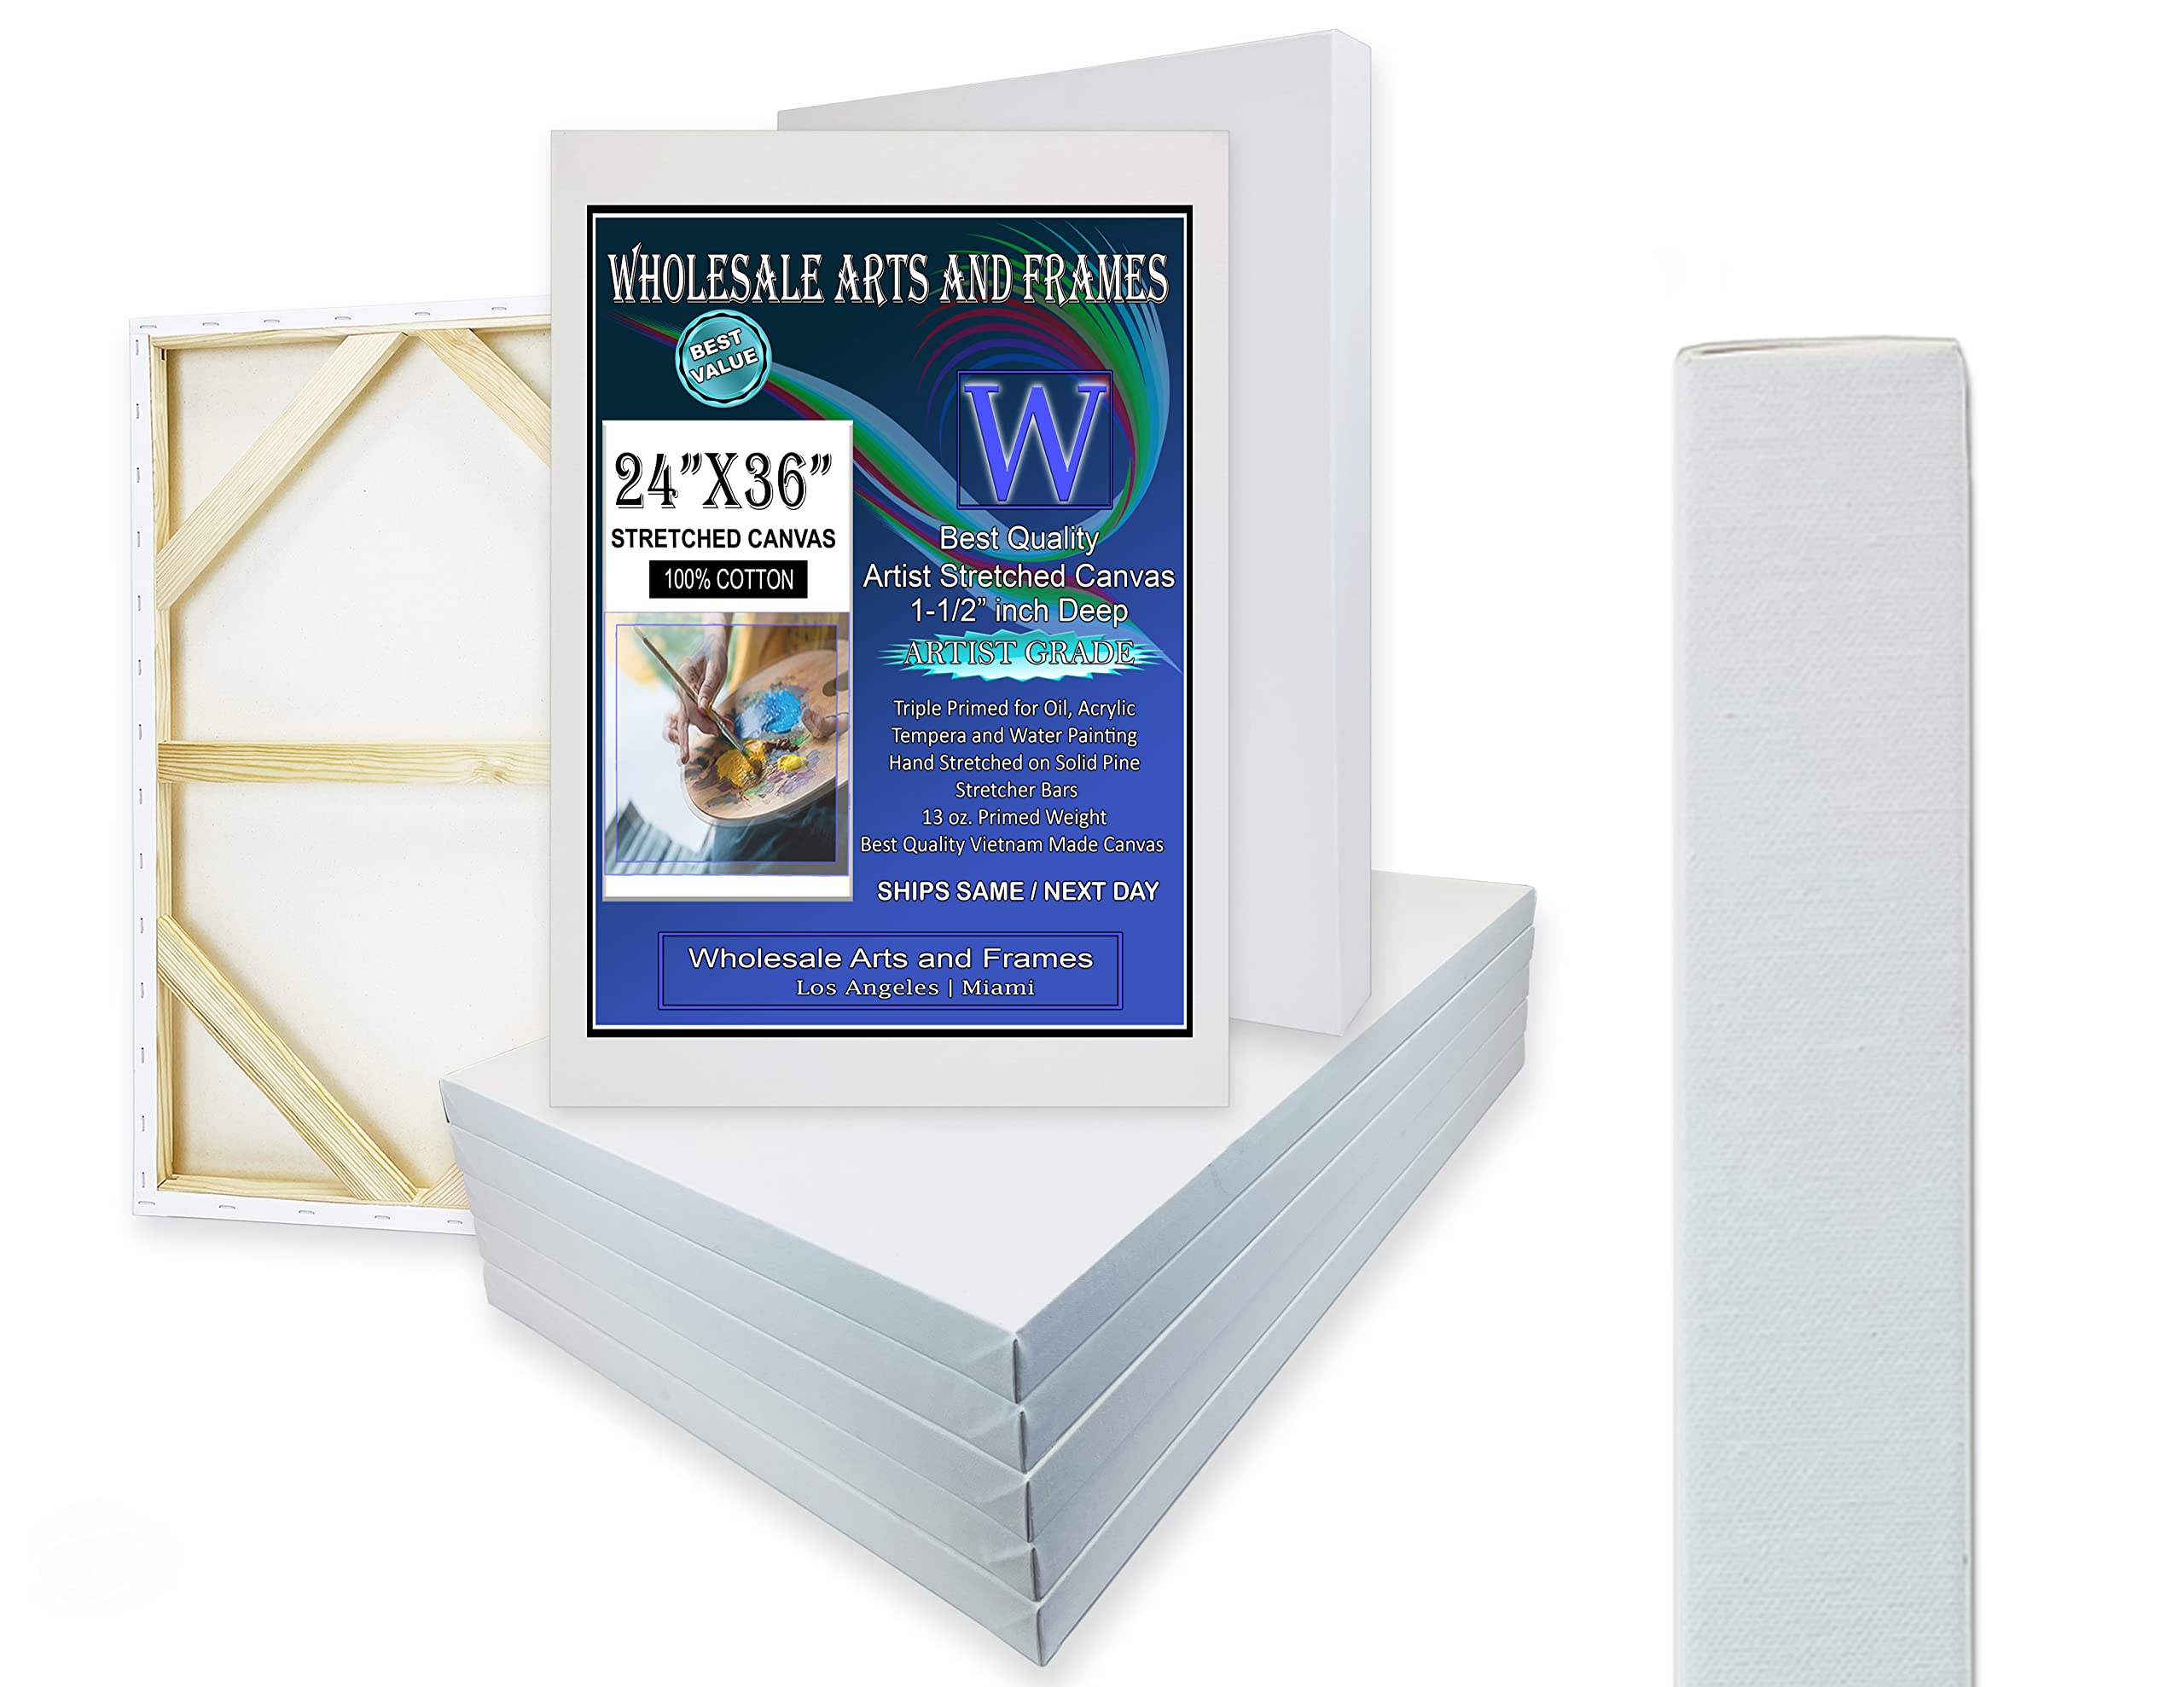 1-1/2" Gallery Depth White Stretched Canvas 24x36 2 Pack 13oz Professional Artist Quality, 100% Cotton, Art Supplies for Crafts, Gesso-Primed for Oil & Acrylic Hand Stretched in USA